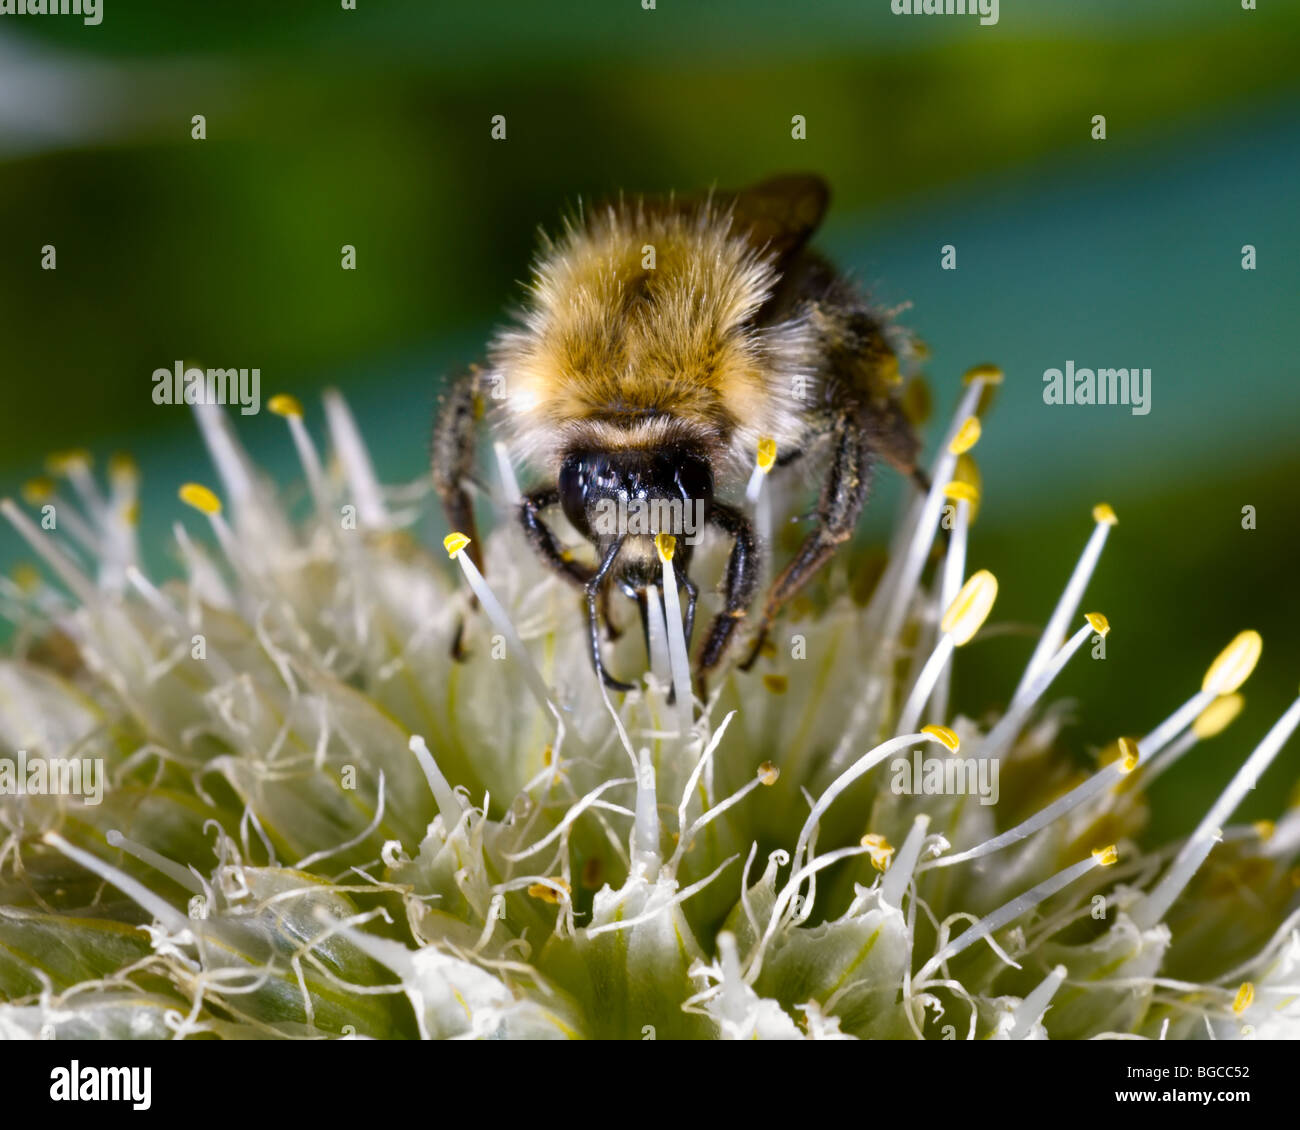 Bumble bee on a flower, Perm, Russia Stock Photo